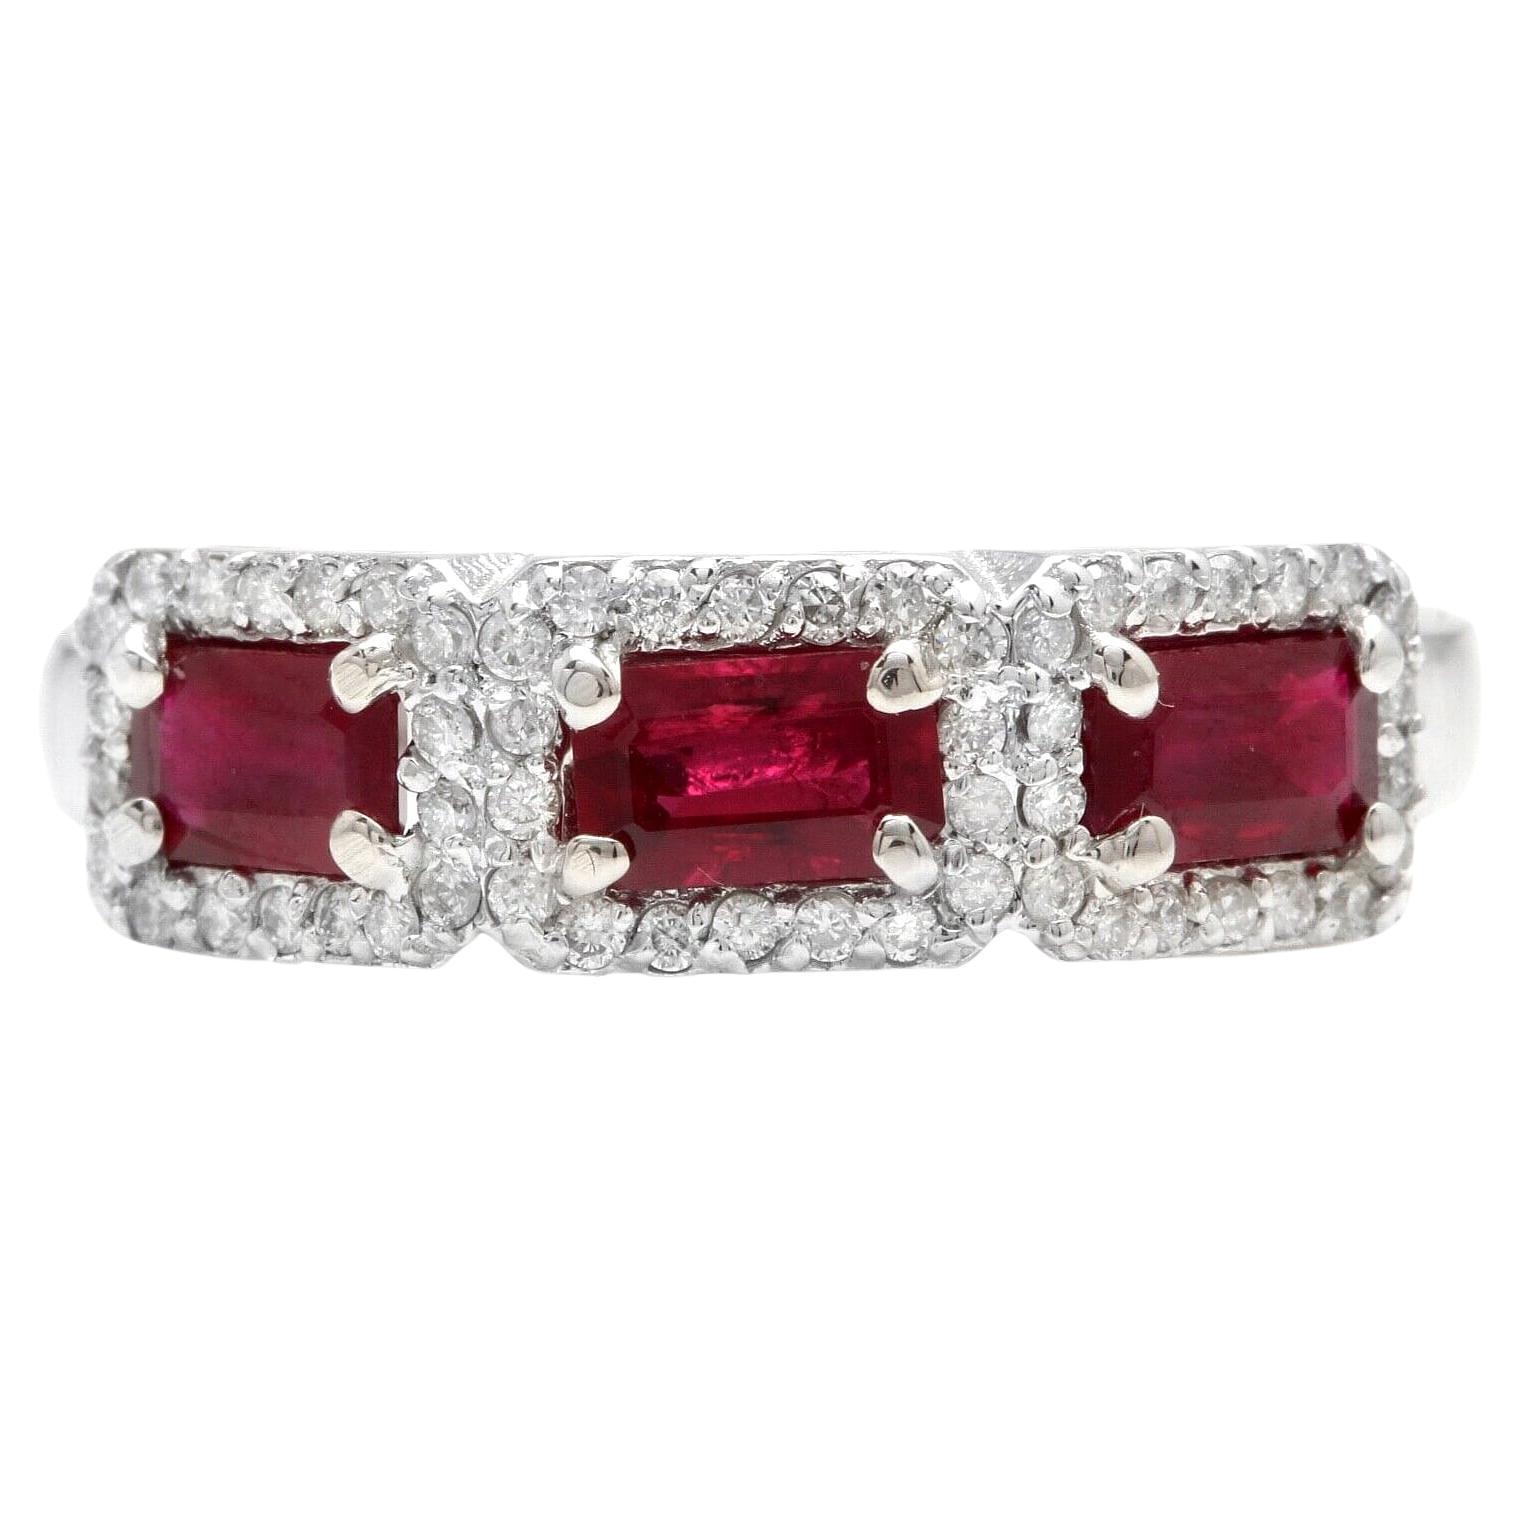 1.22 Carats Natural Ruby and Diamond 14k Solid White Gold Ring